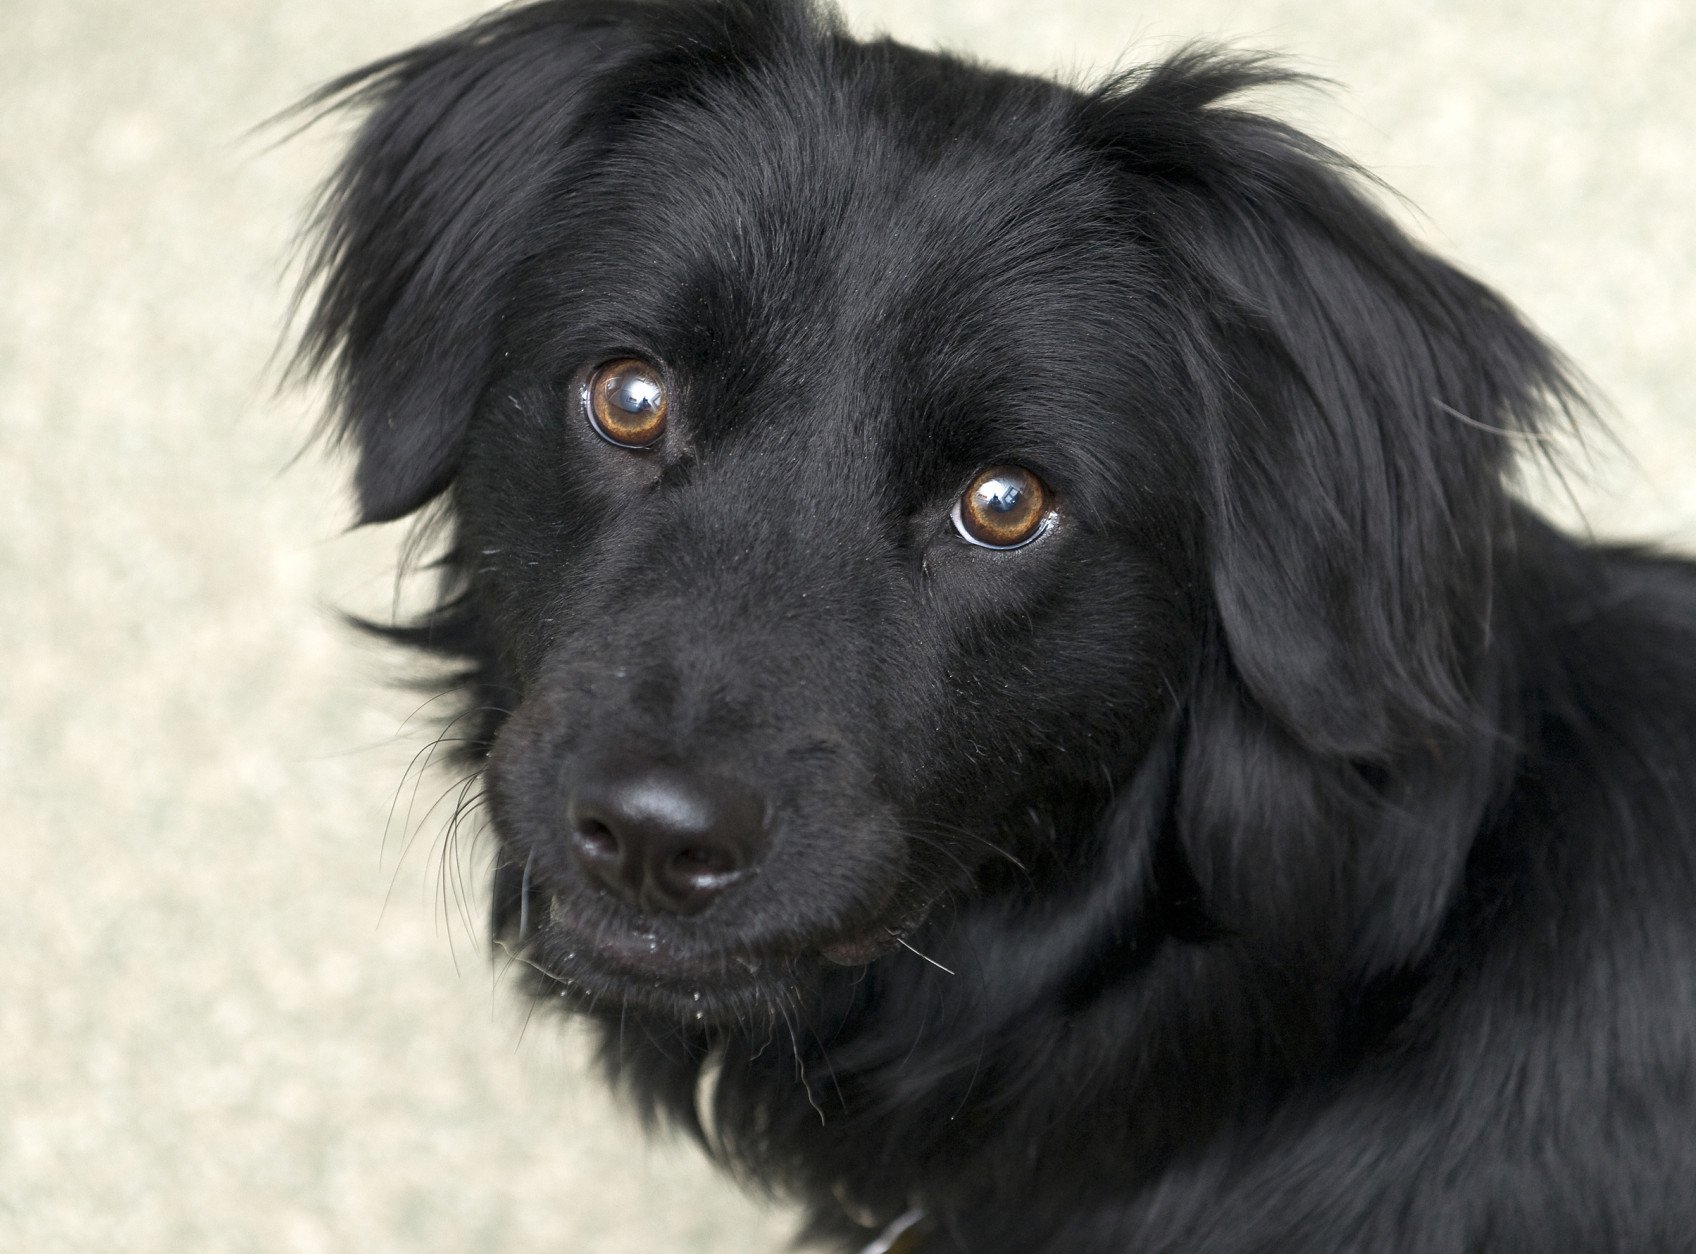 Saturn is an 18-month-old retriever mix available for adoption from the Washington Animal Rescue League. (Courtesy WARL) 